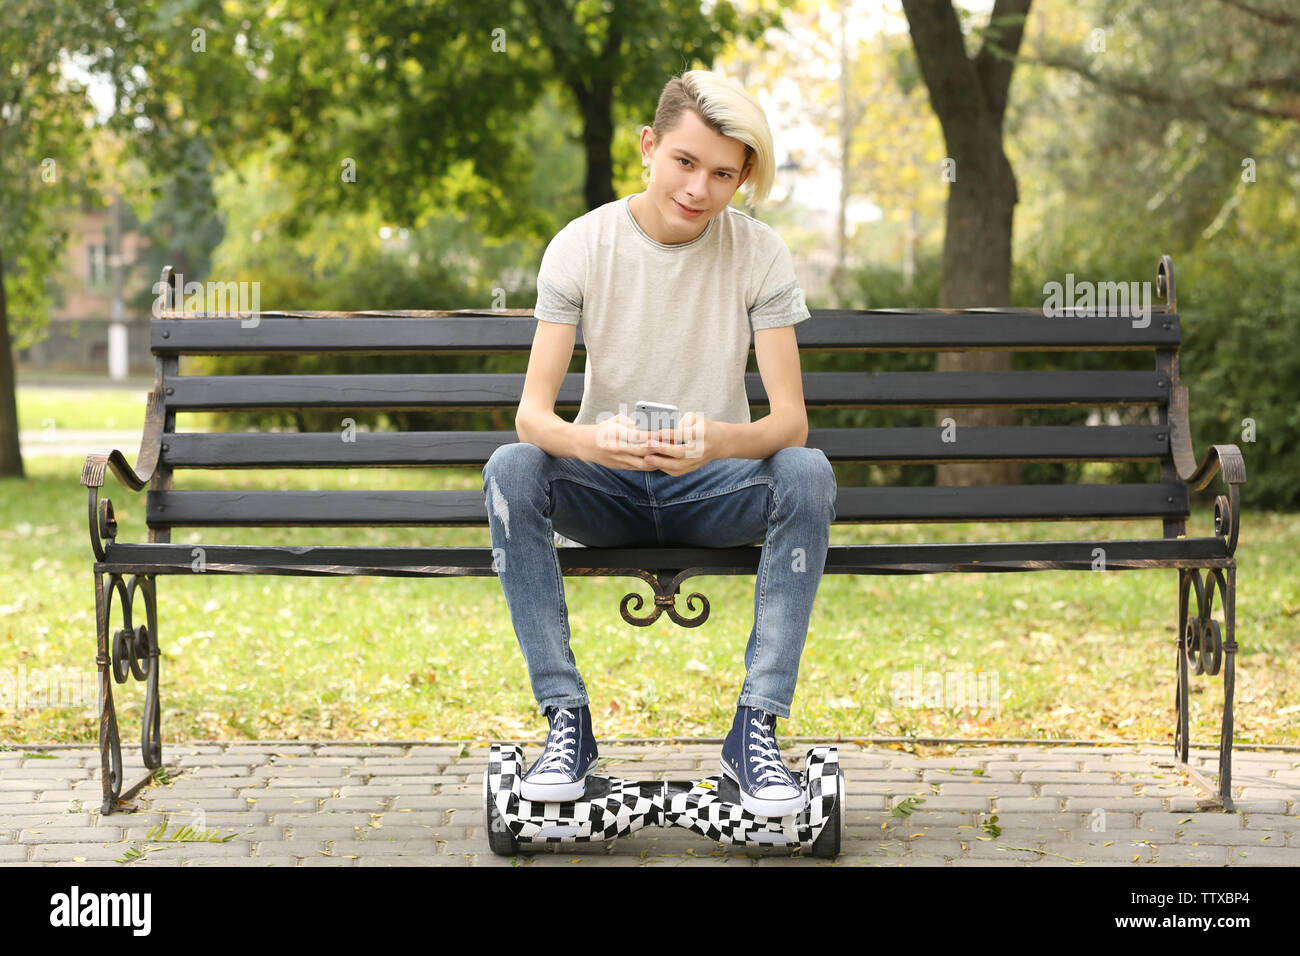 Cute teenager boy sitting on bench in park Stock Photo - Alamy